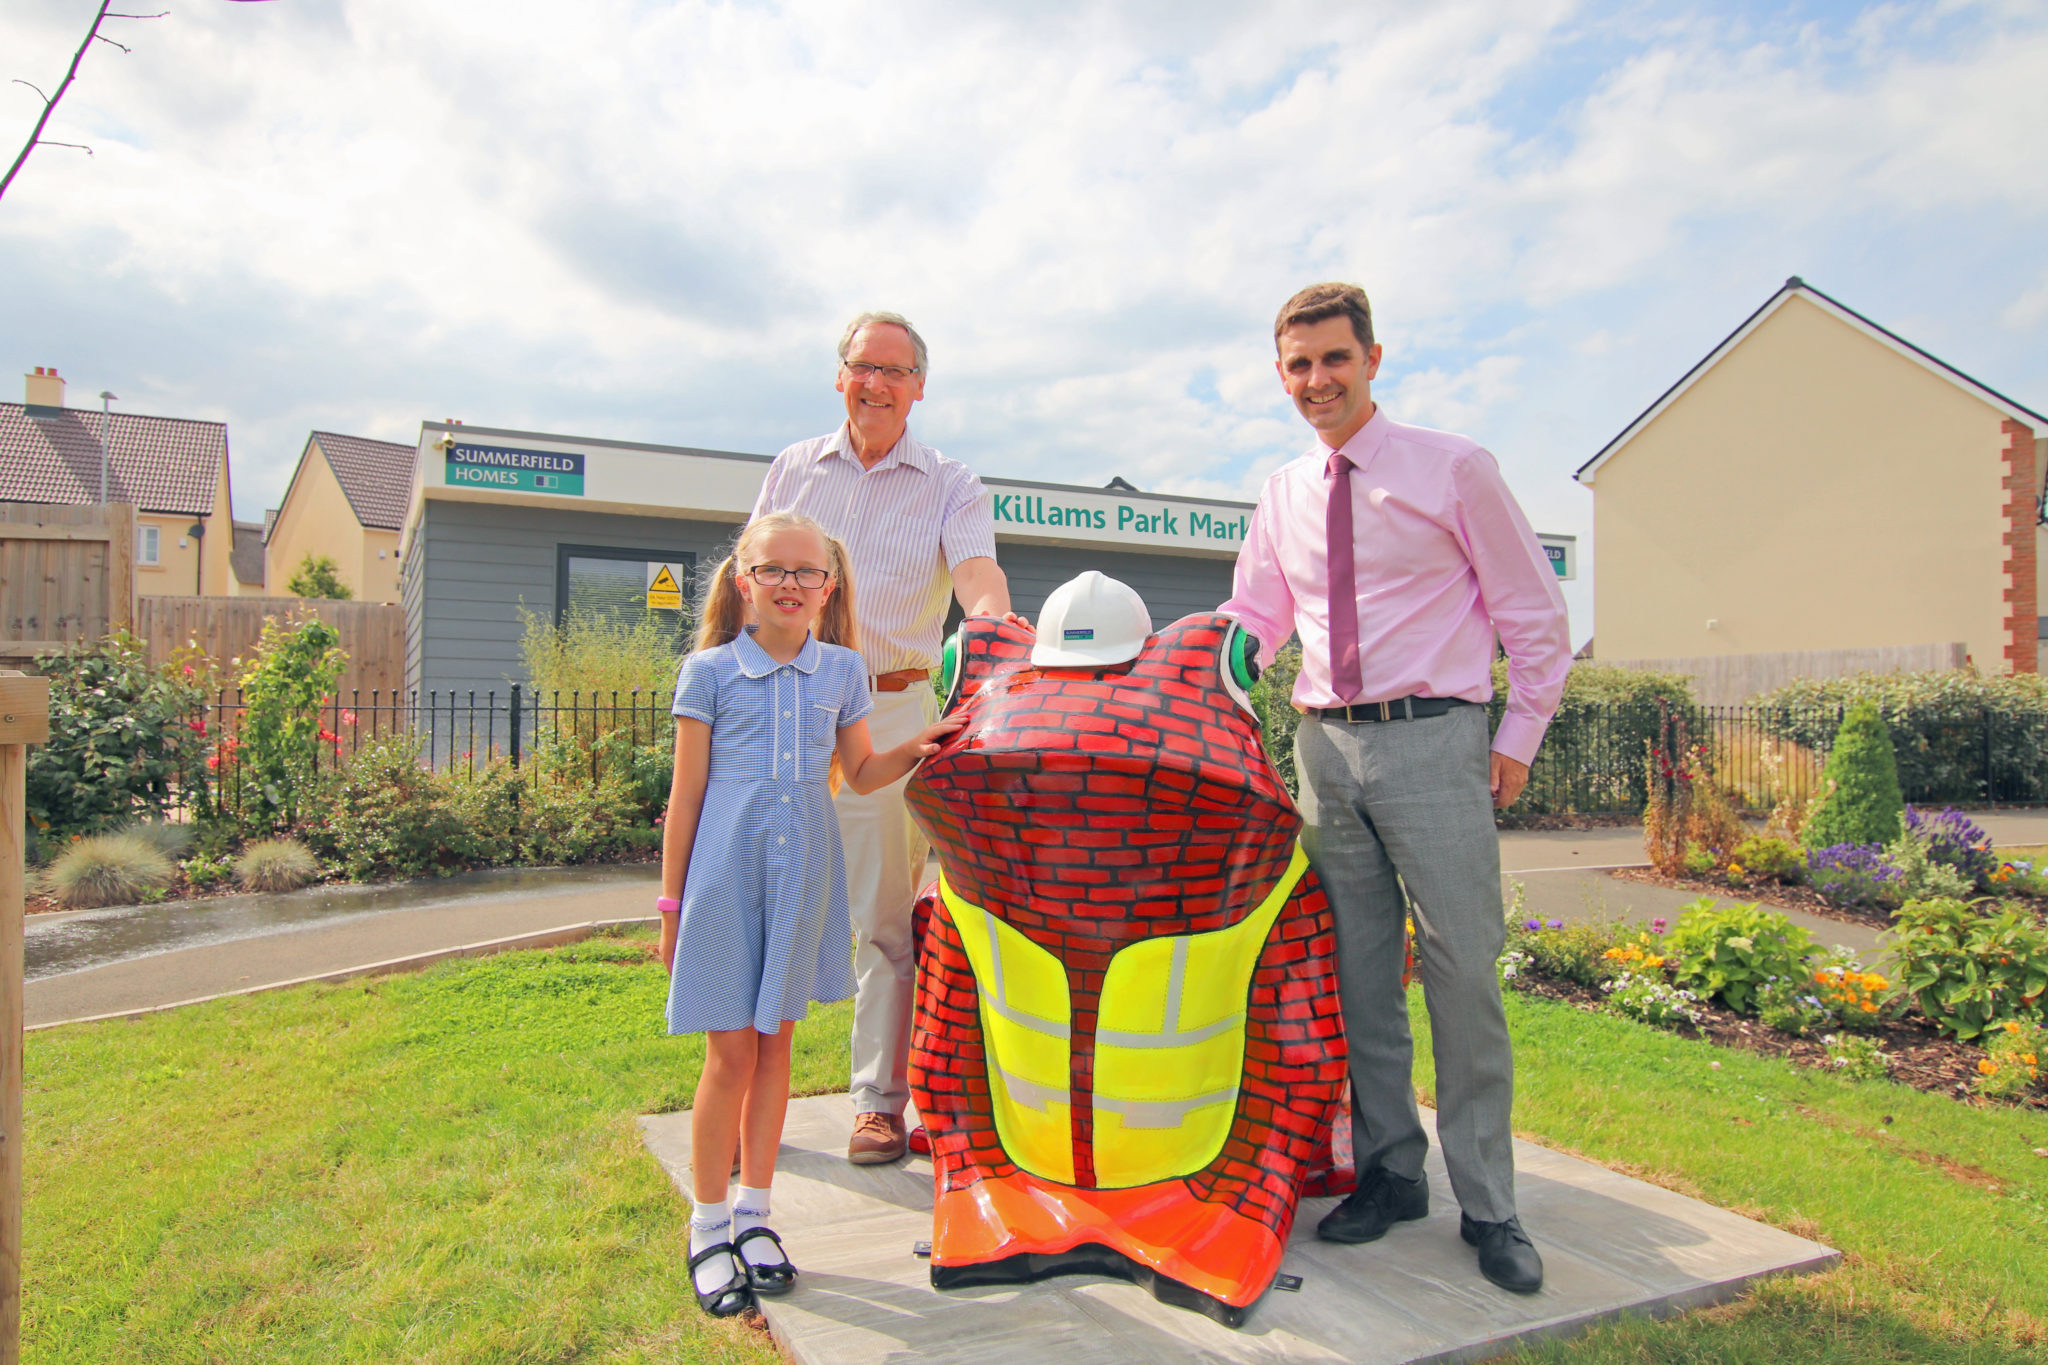 Summerfield Homes – proud to support The Taunton Toad Trail